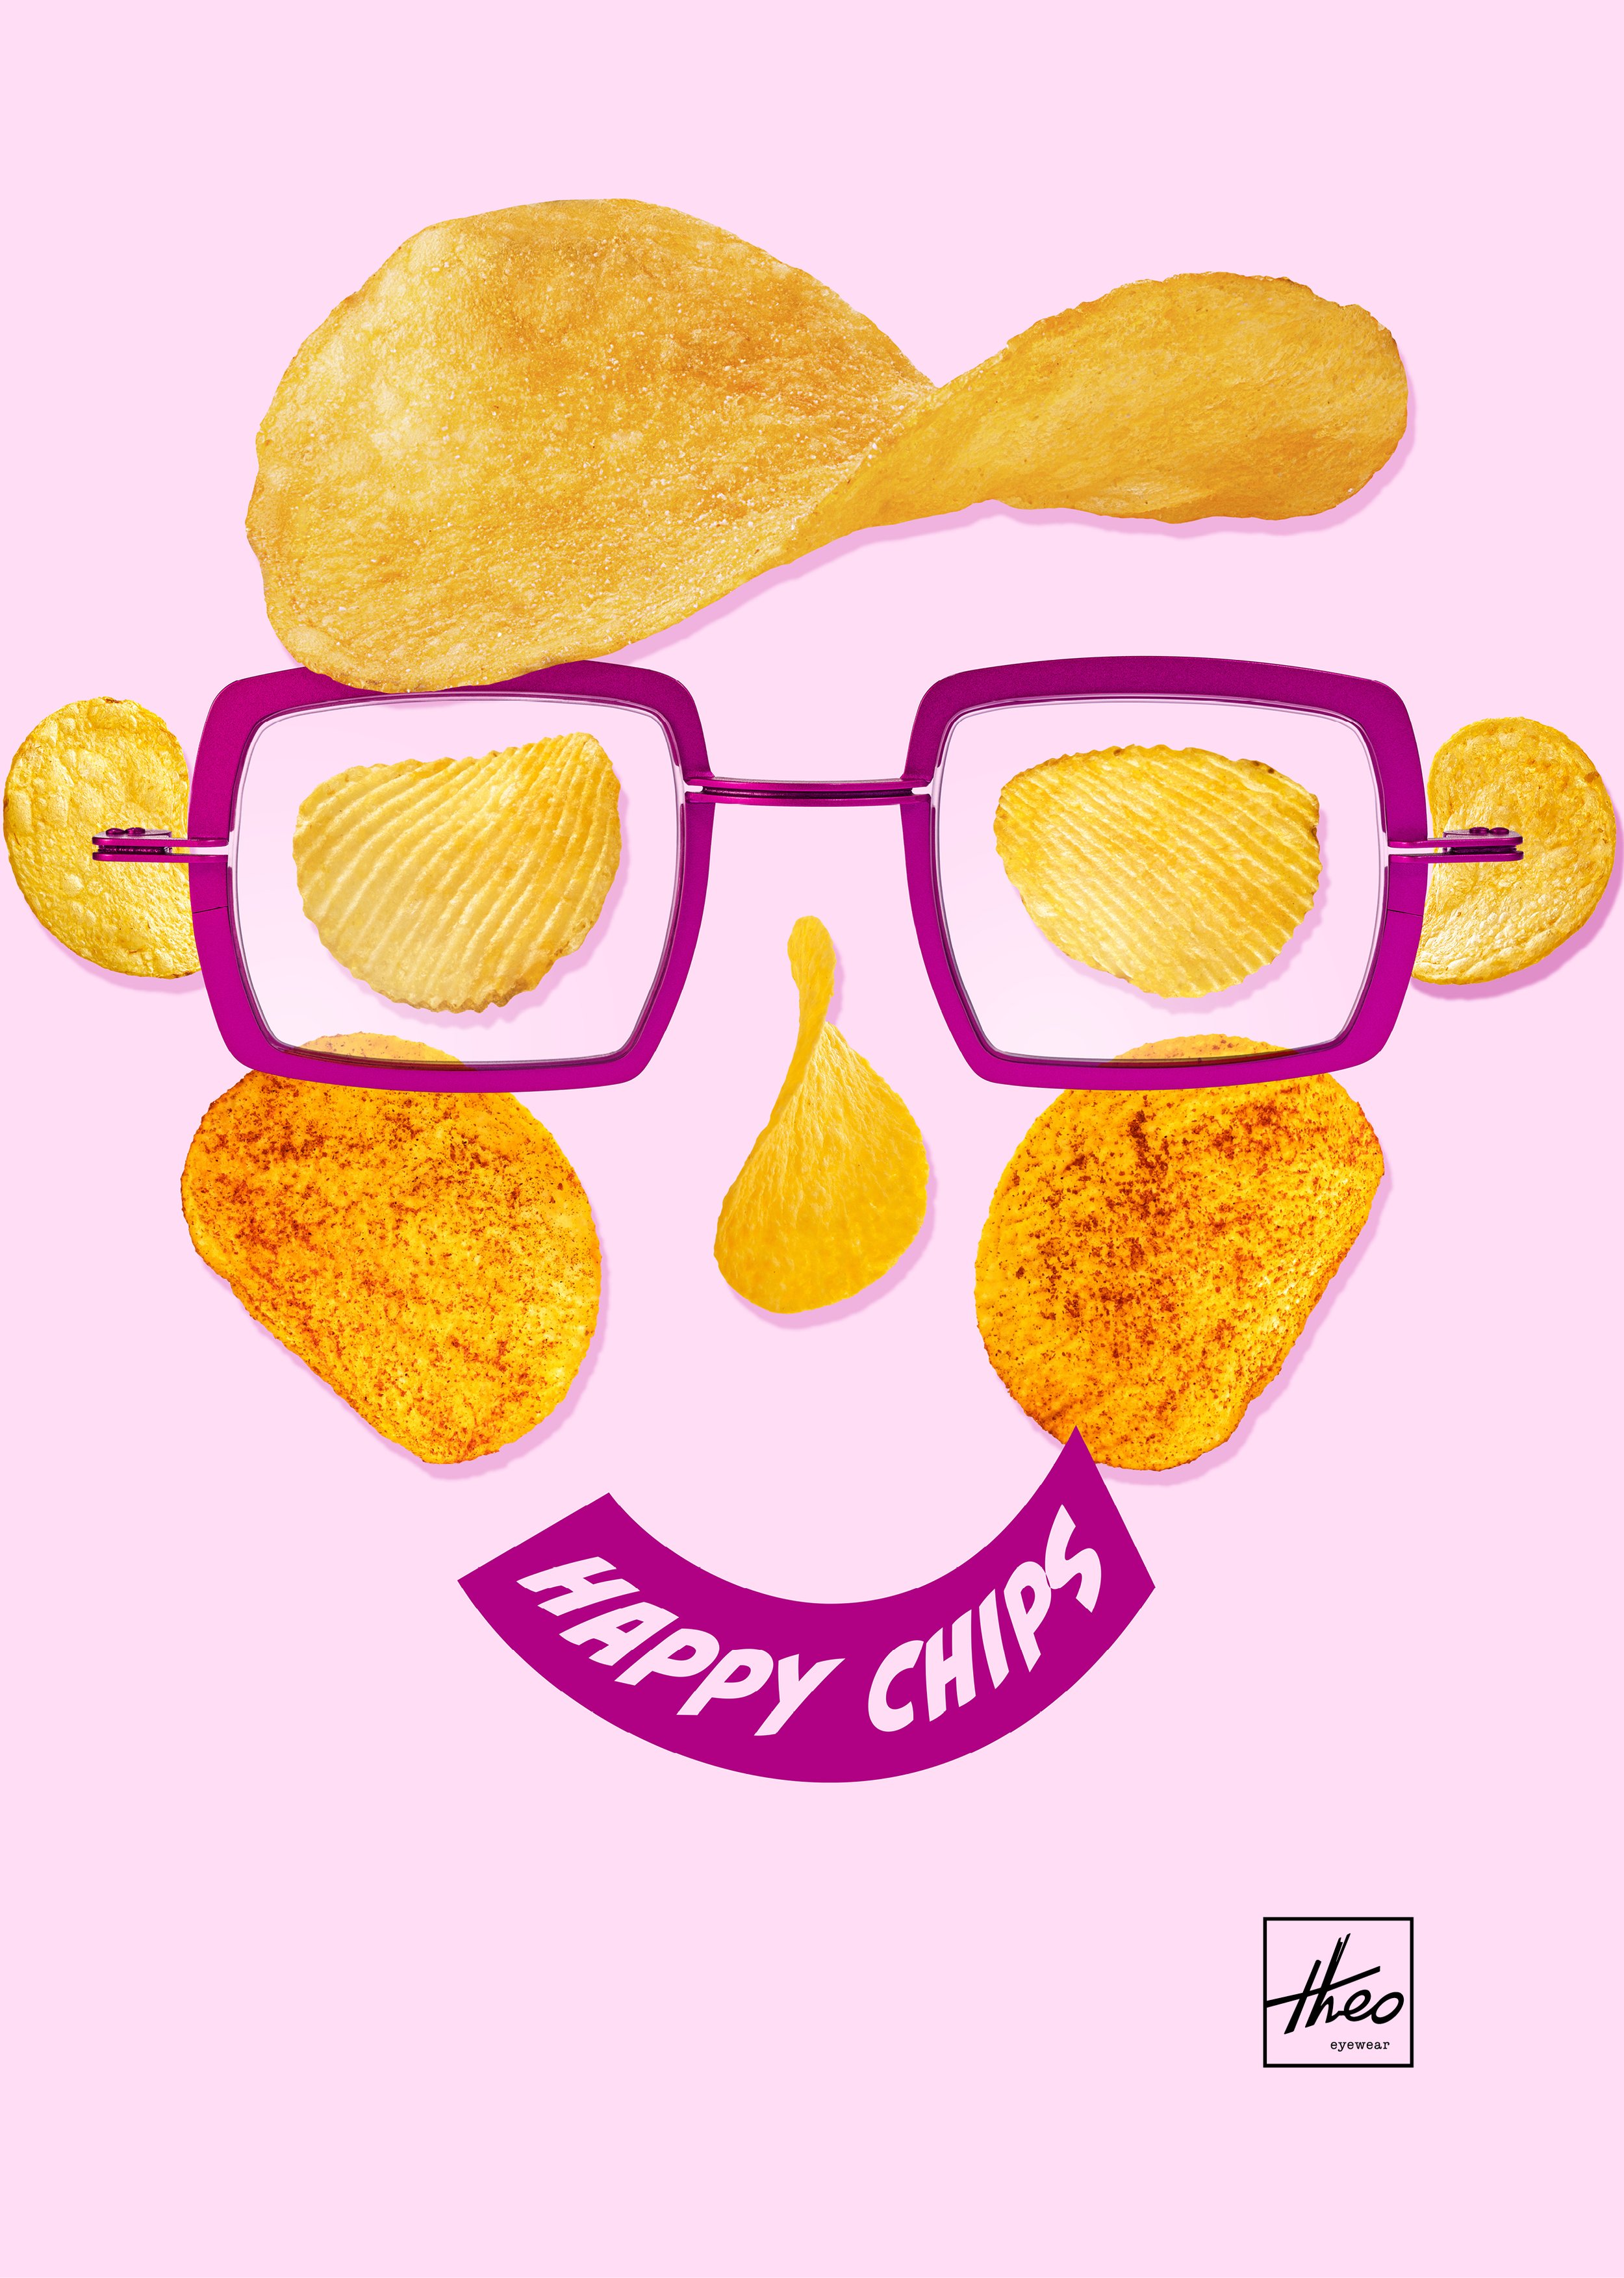 Happy chips_A4-02.jpg